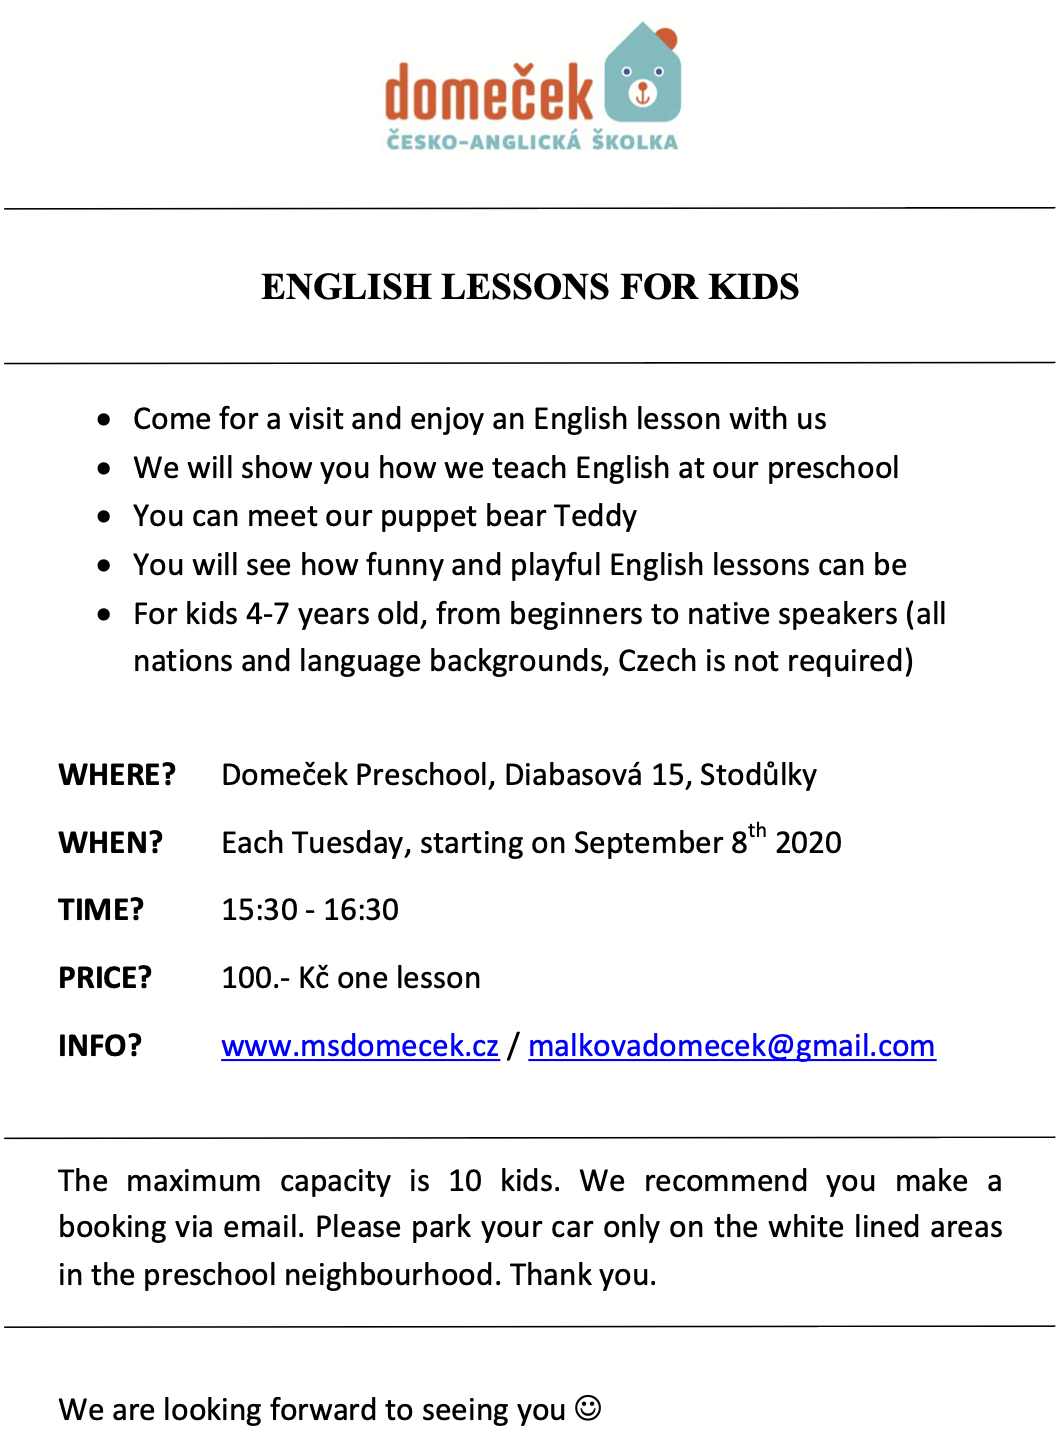 English lessons for kids